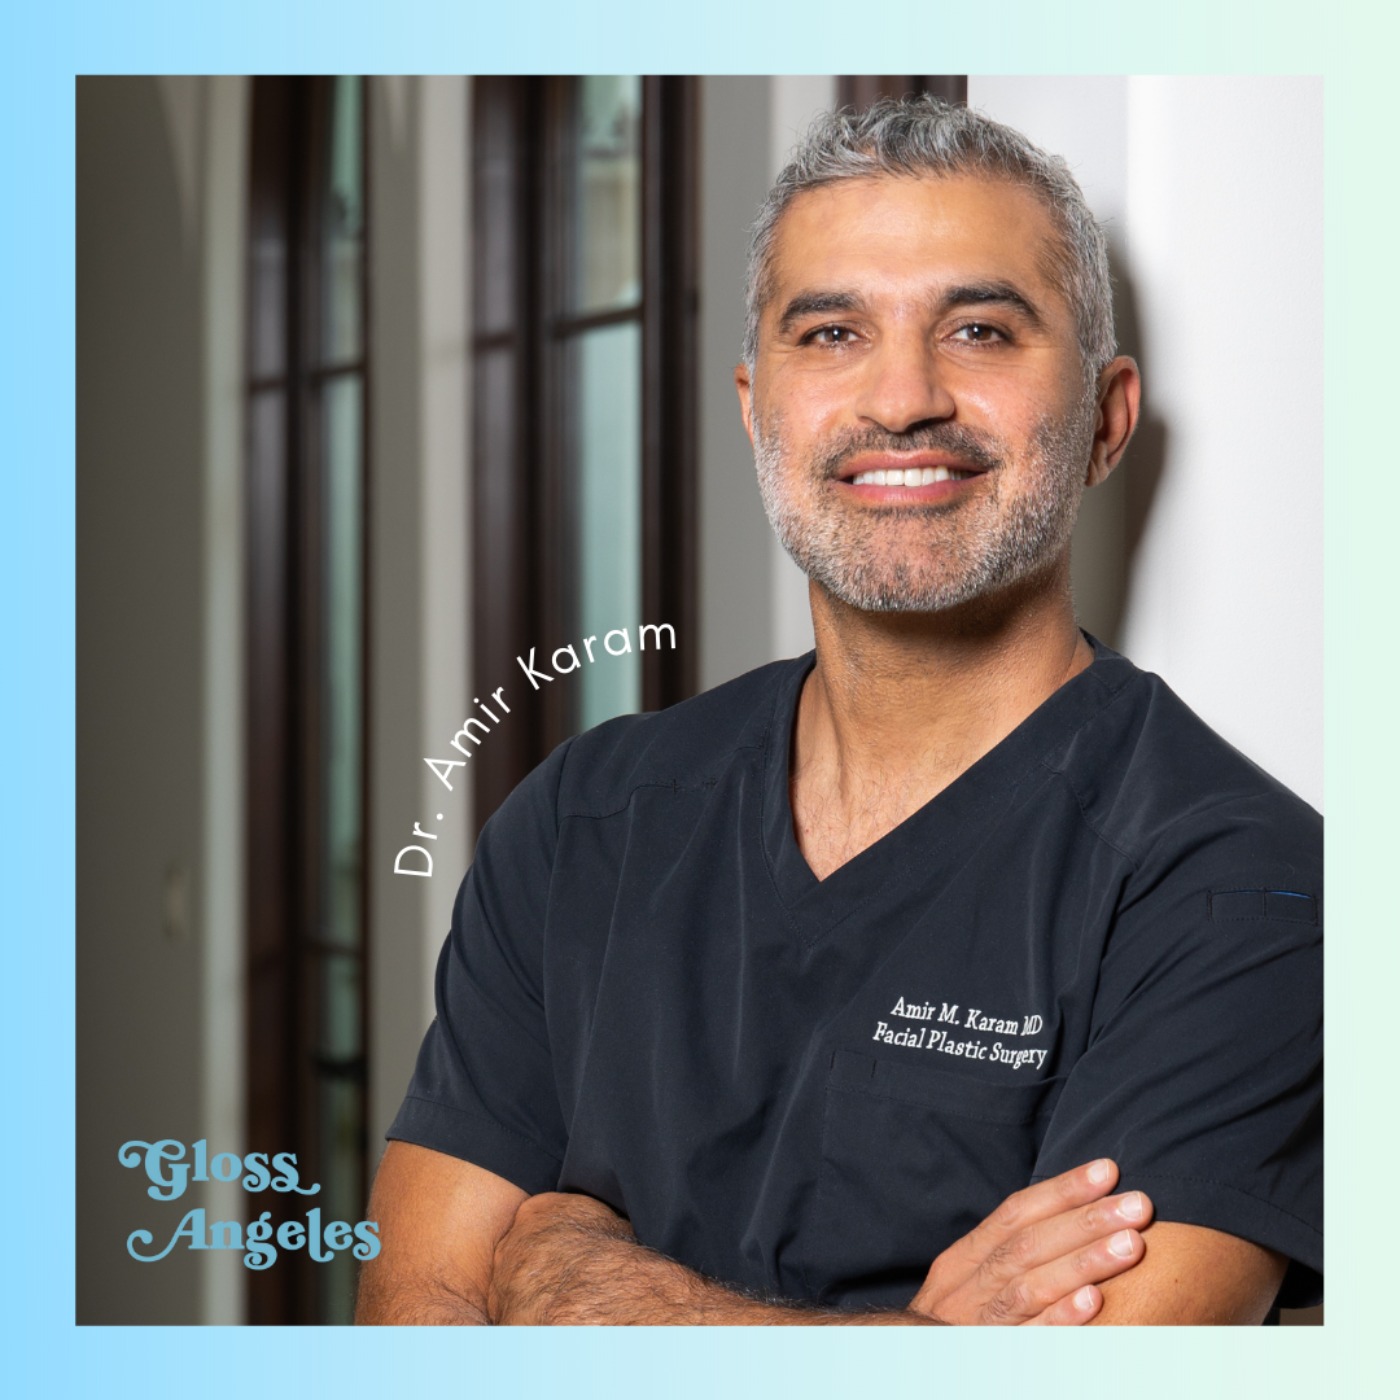 The 3 Pillars of How the Face Ages With Dr. Amir Karam